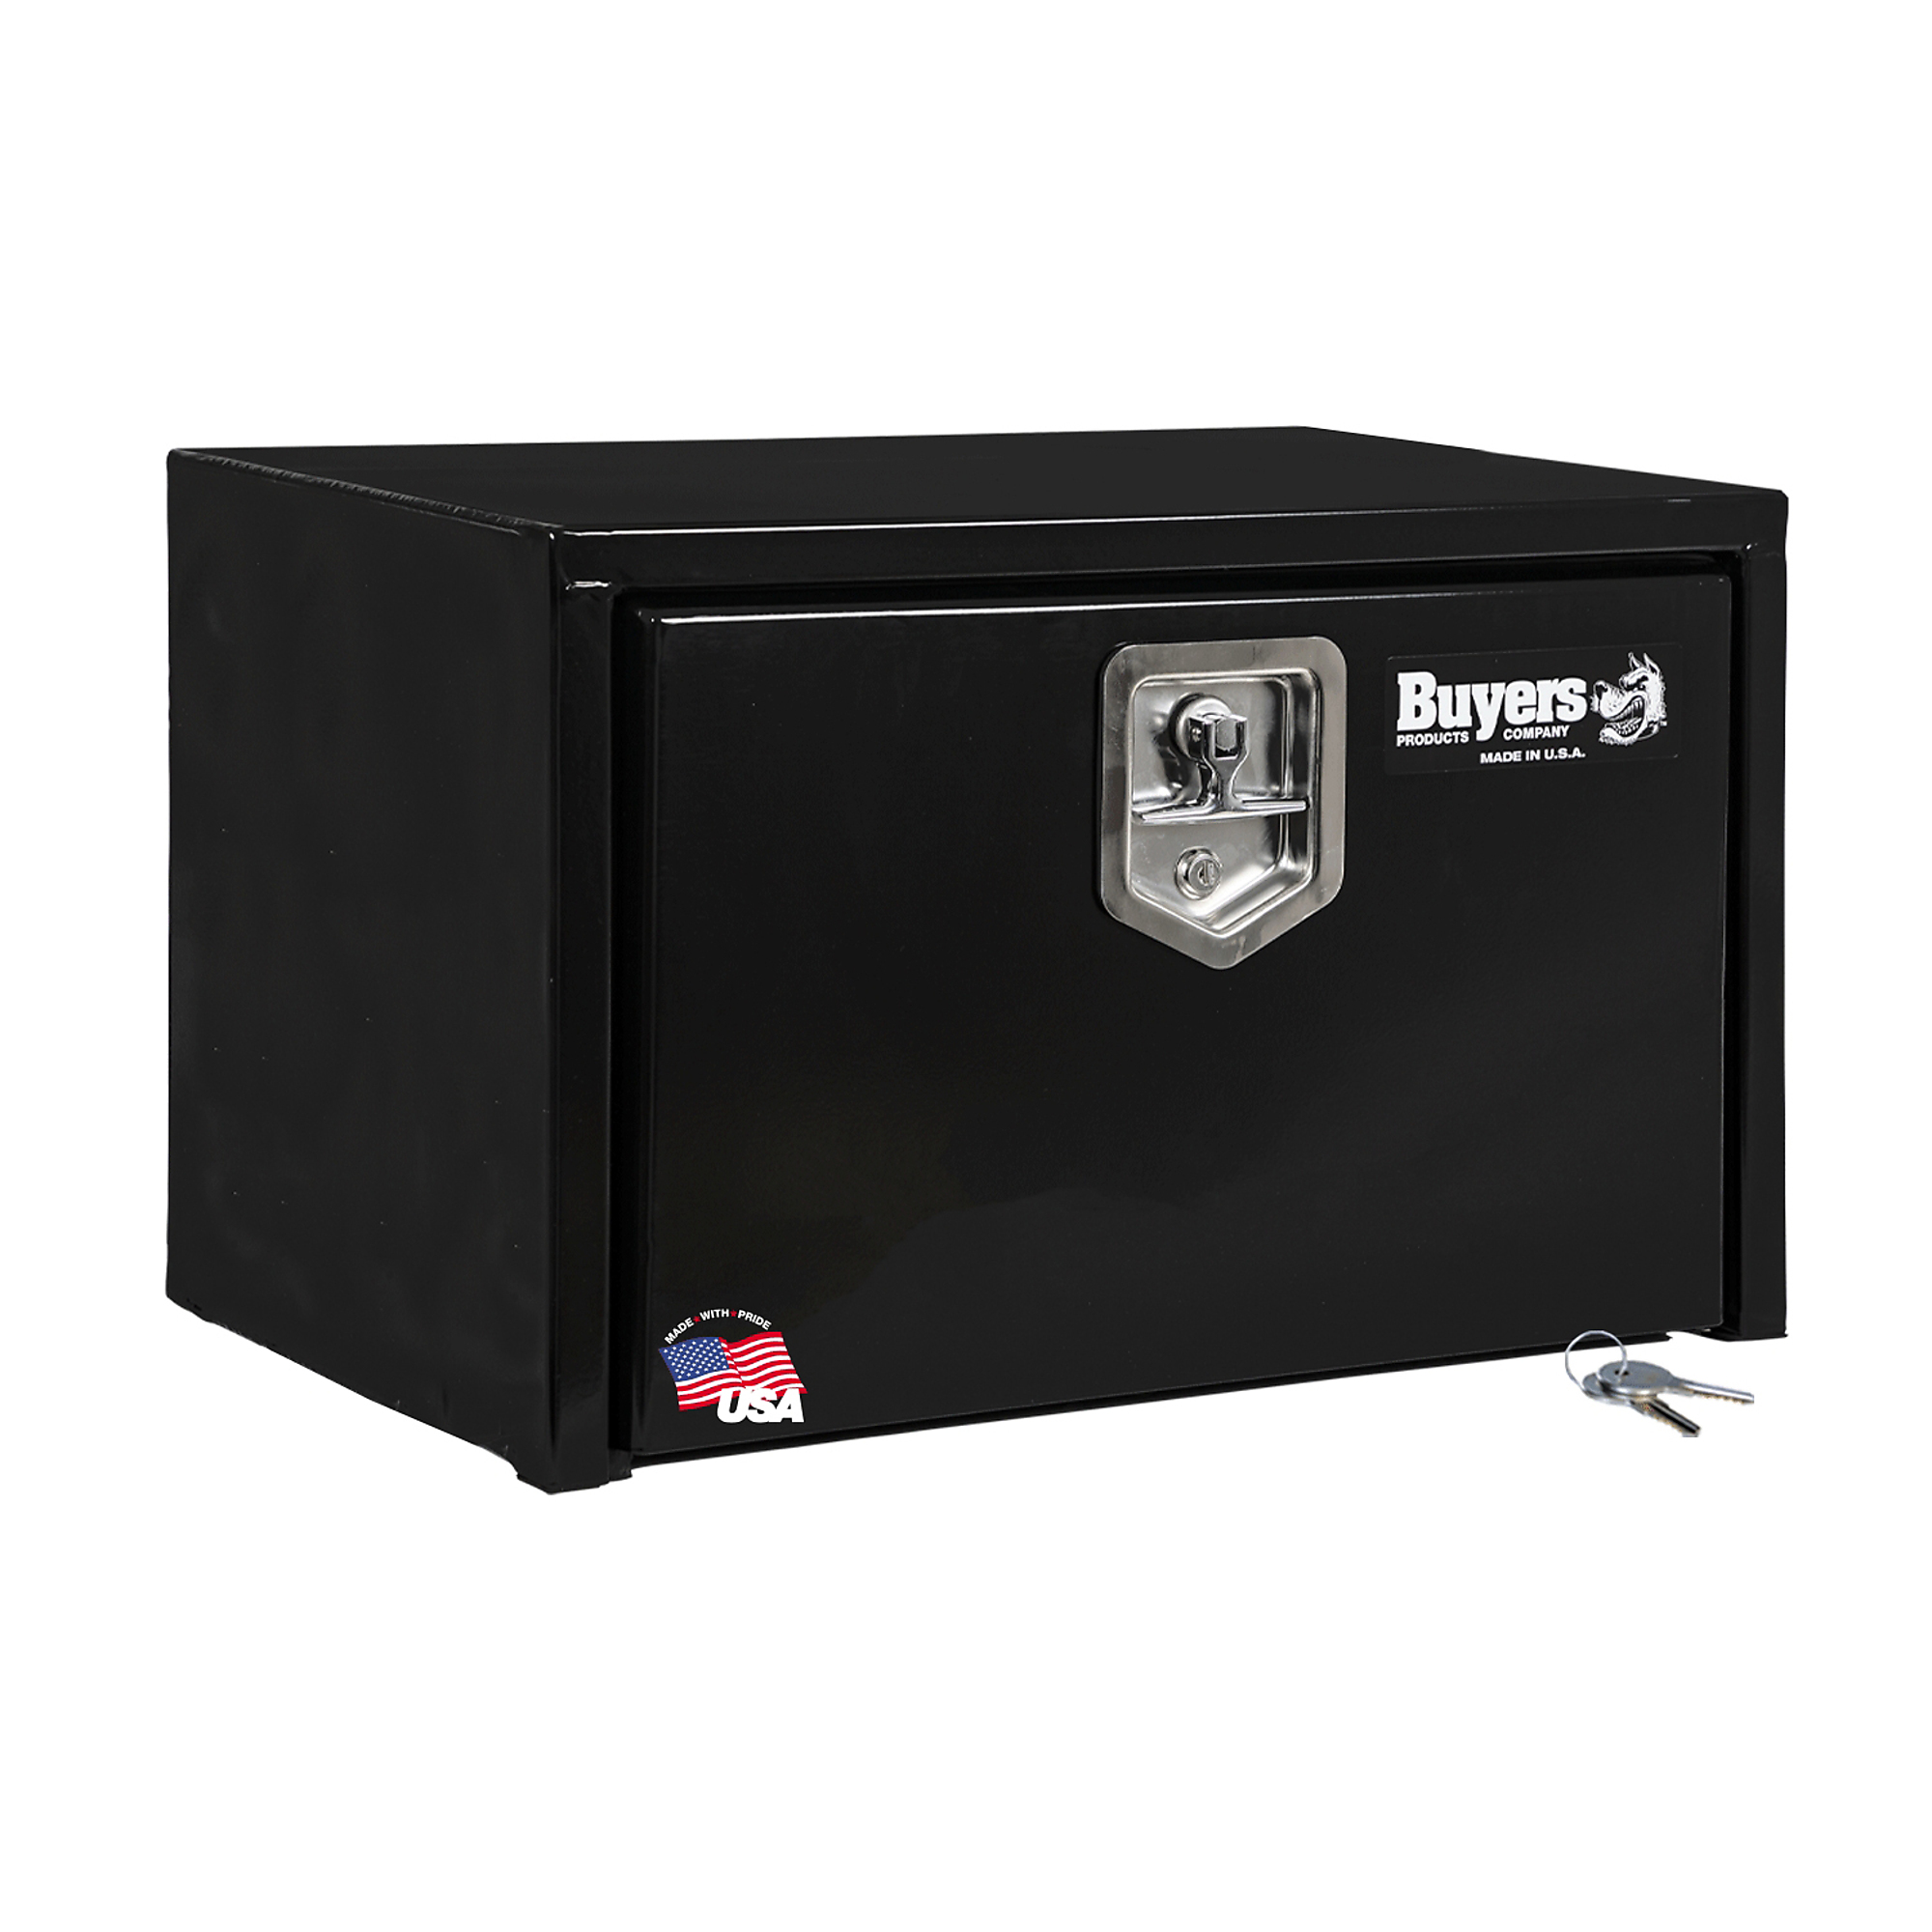 Buyers Products Underbody Truck Box, 24Inch Carbon Steel, Glossy Black, Model 1703322